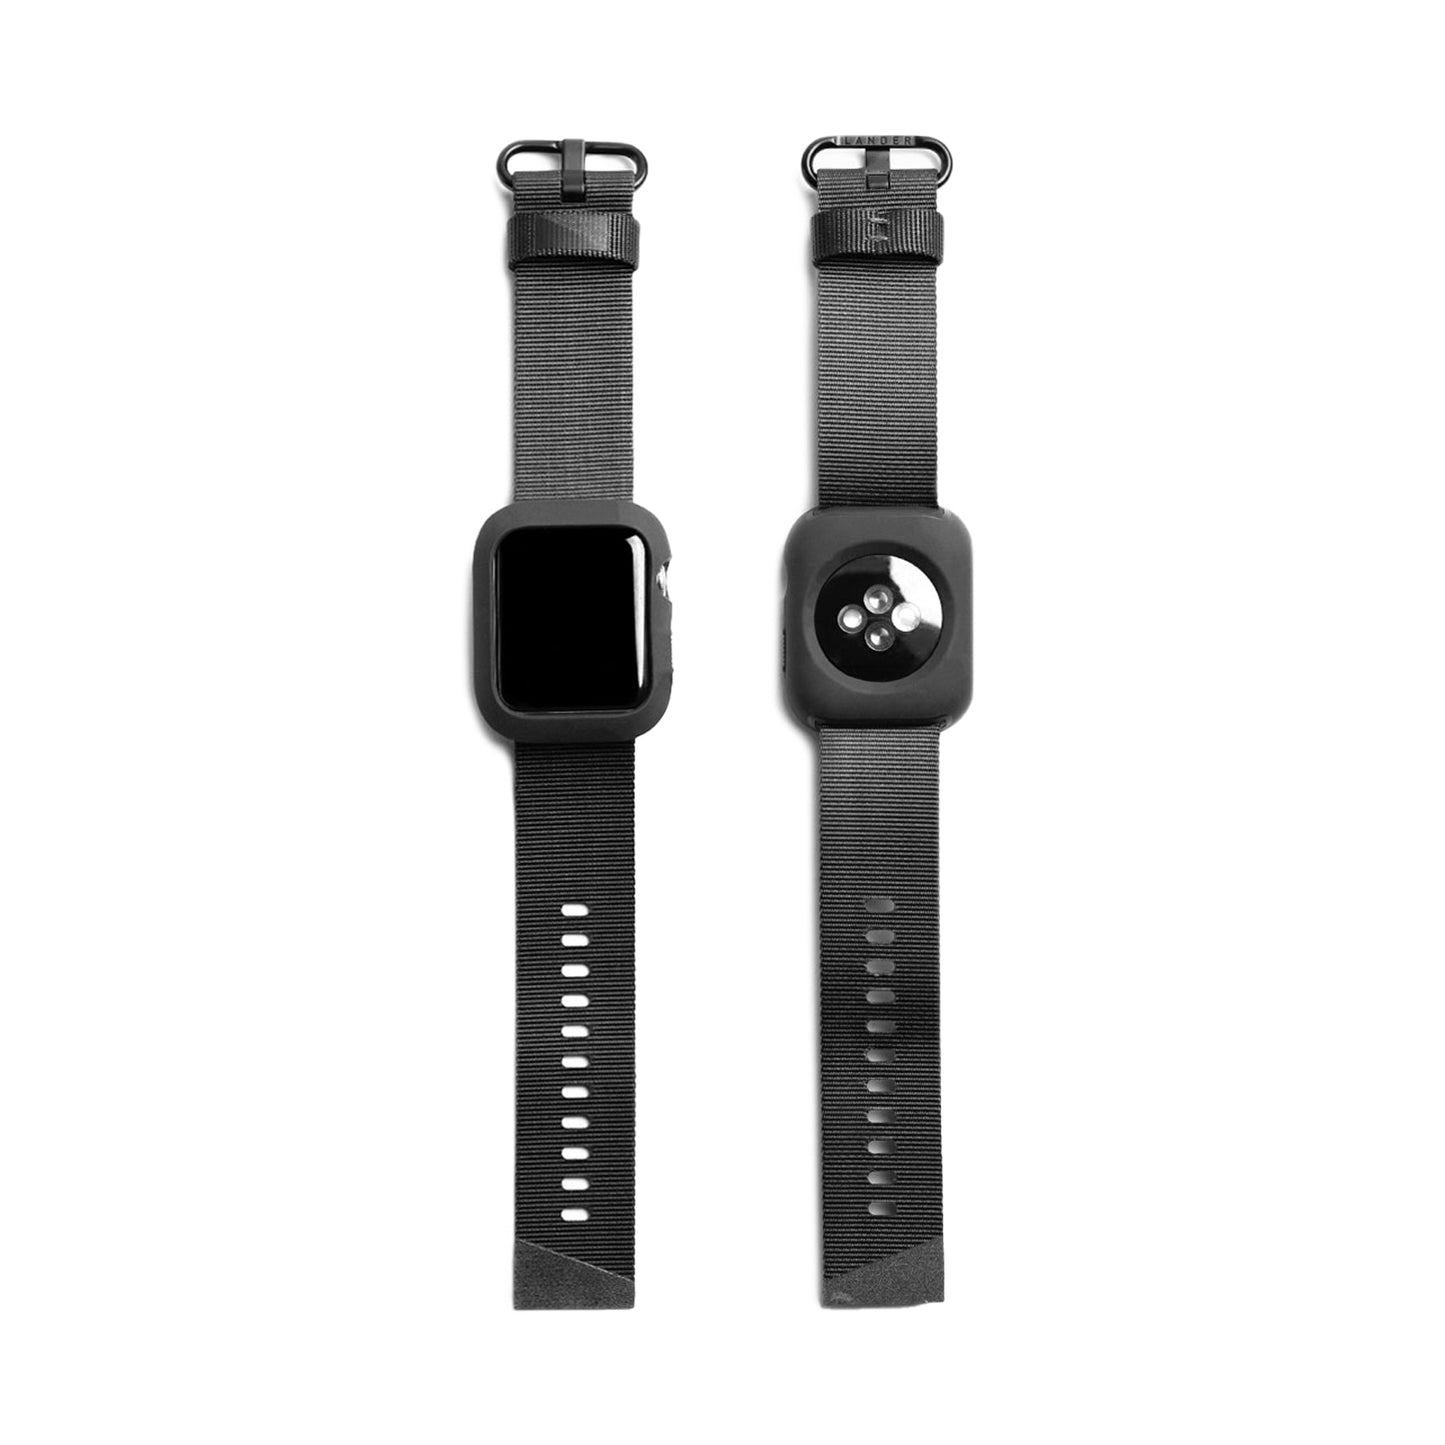 Moab Apple Watch Case + Band